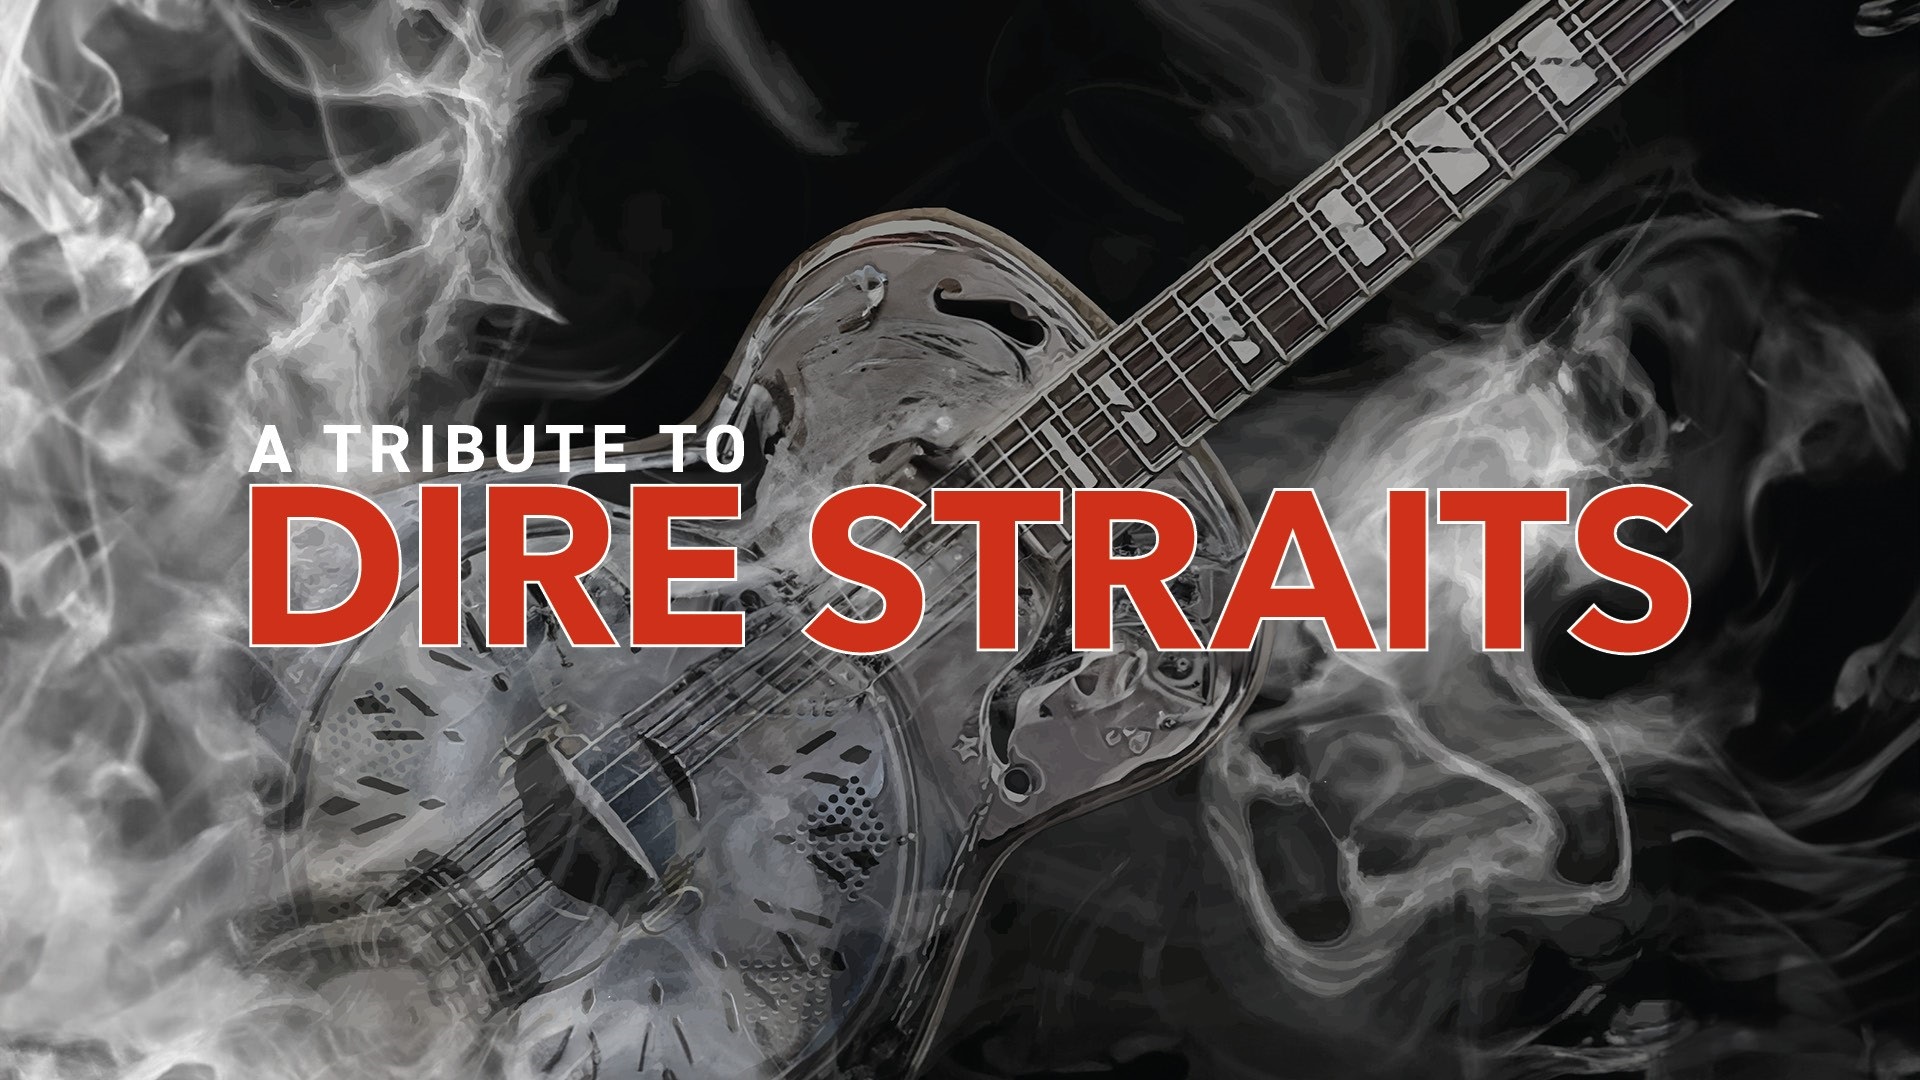 A Tribute to Dire Straits